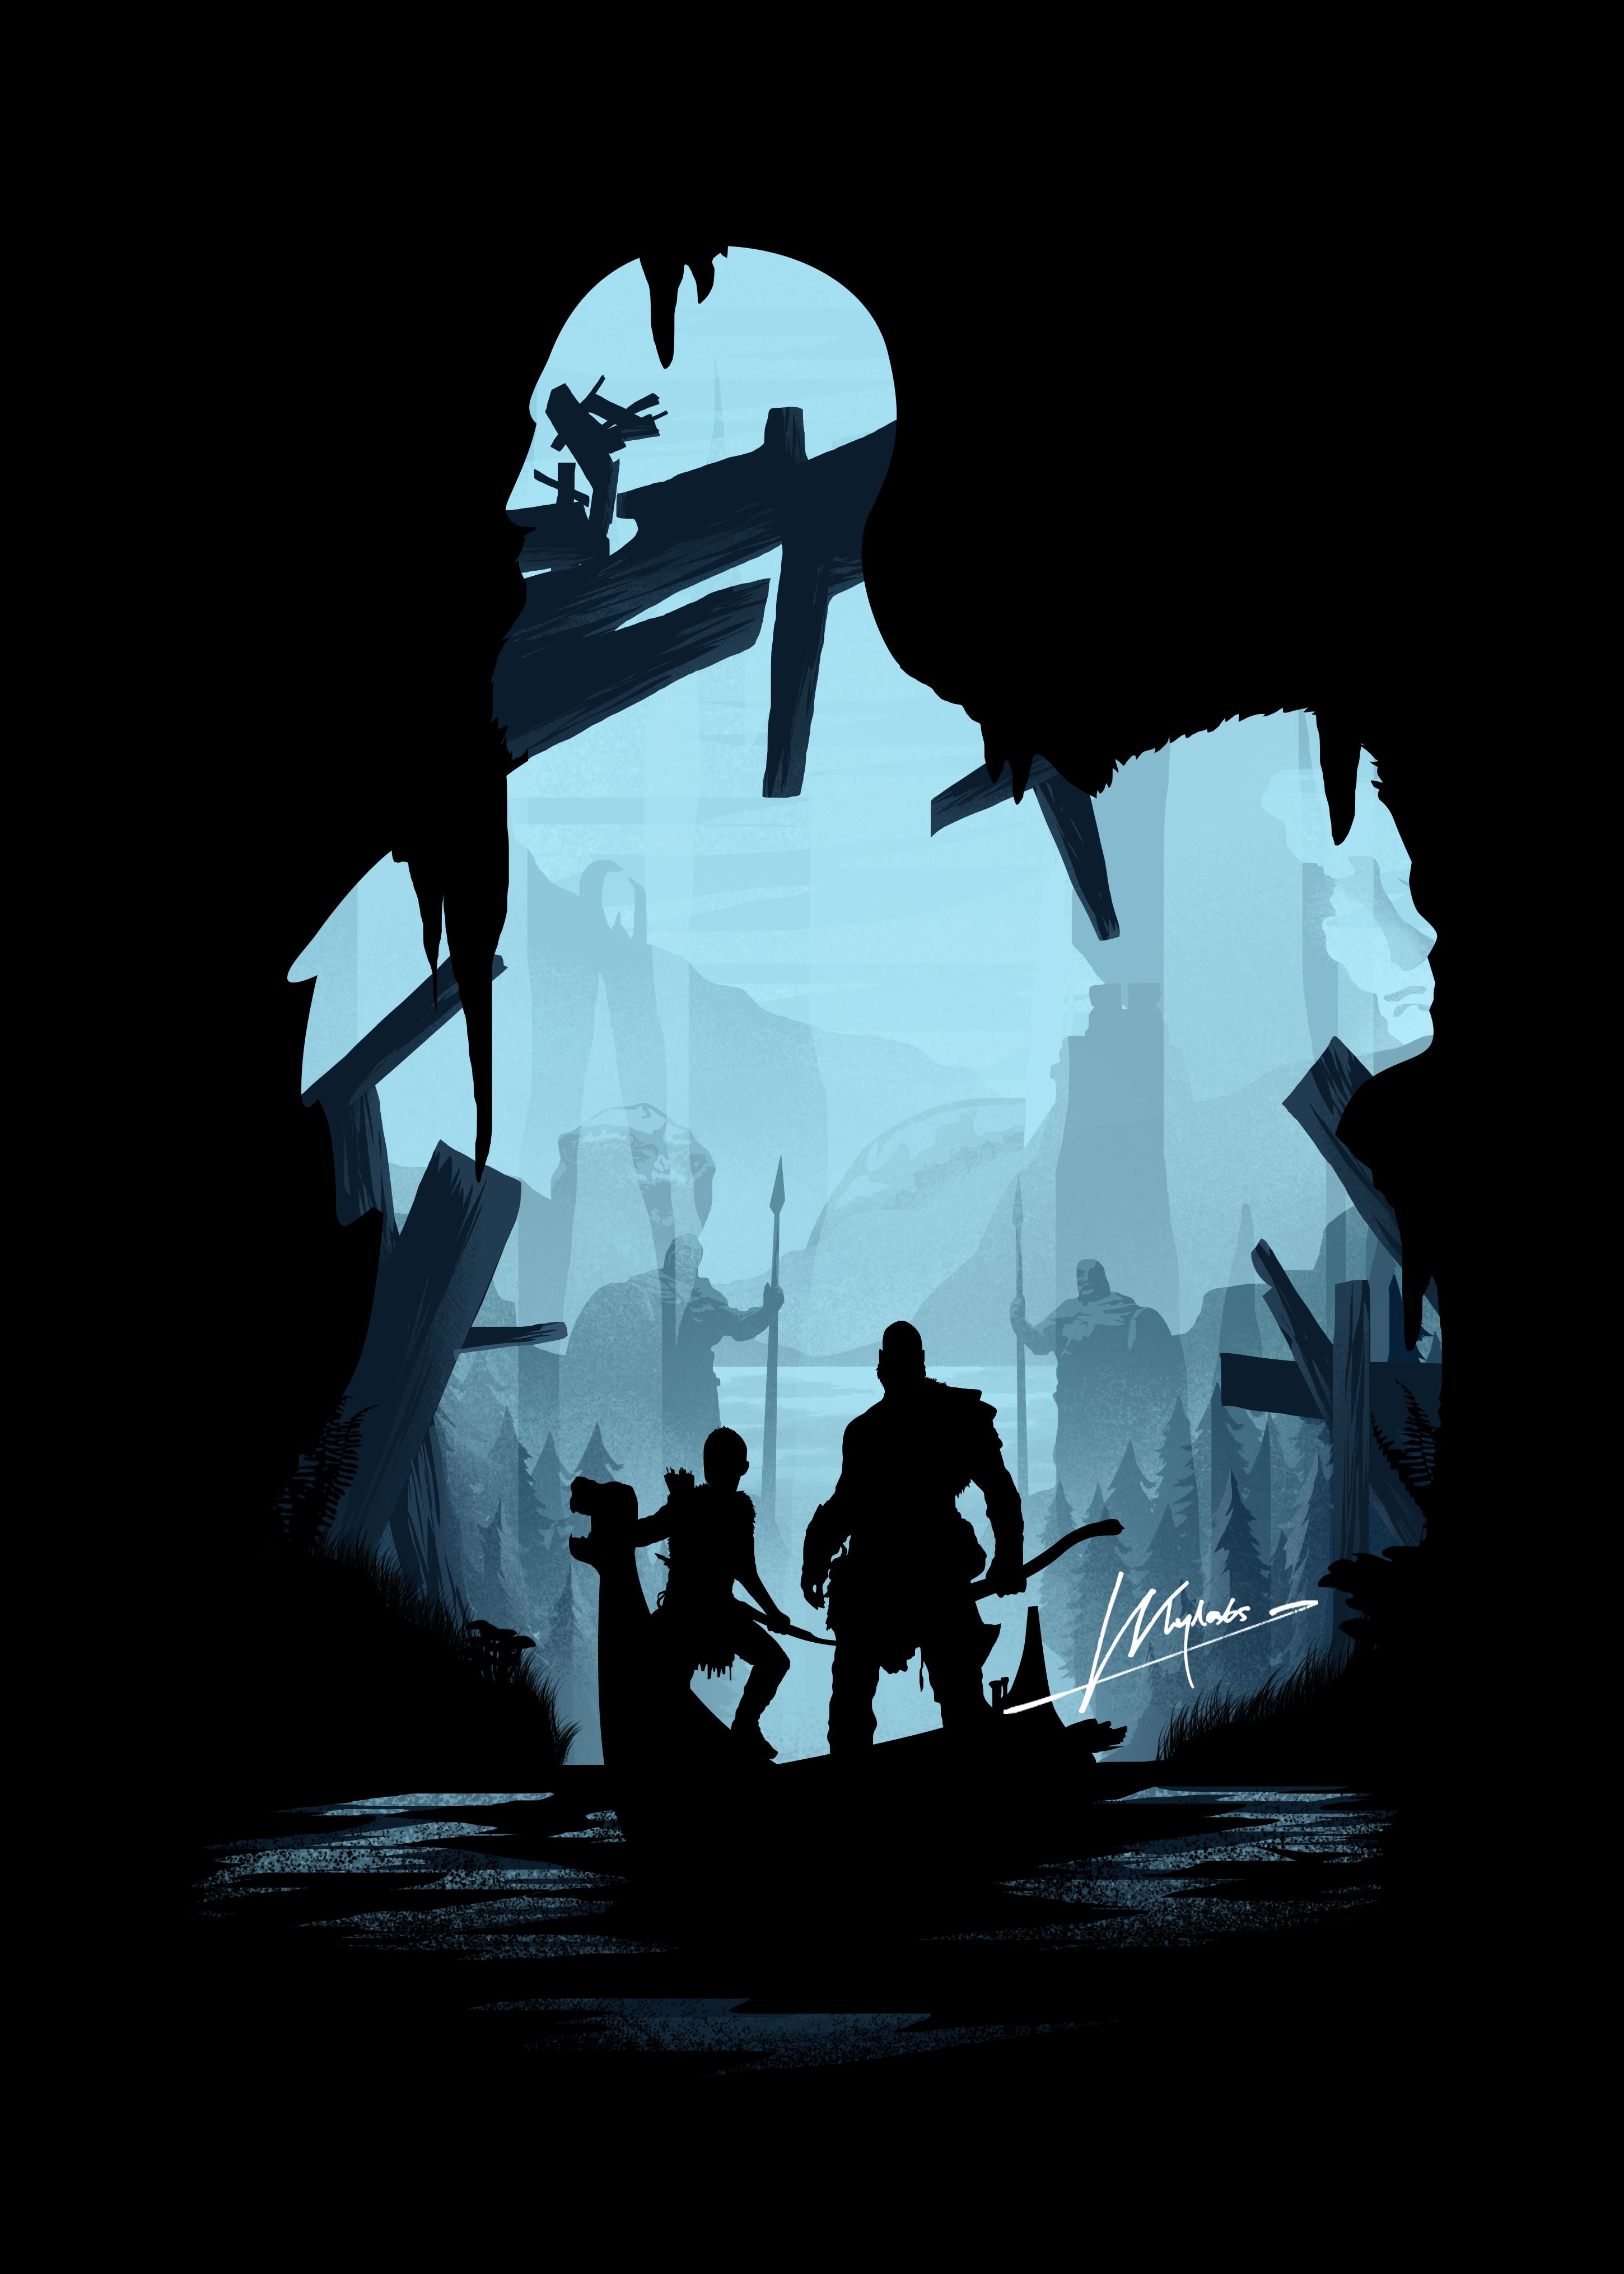 God of War' Poster Print by whyadiphew. Displate. God of war, The last of us, Minimalist poster